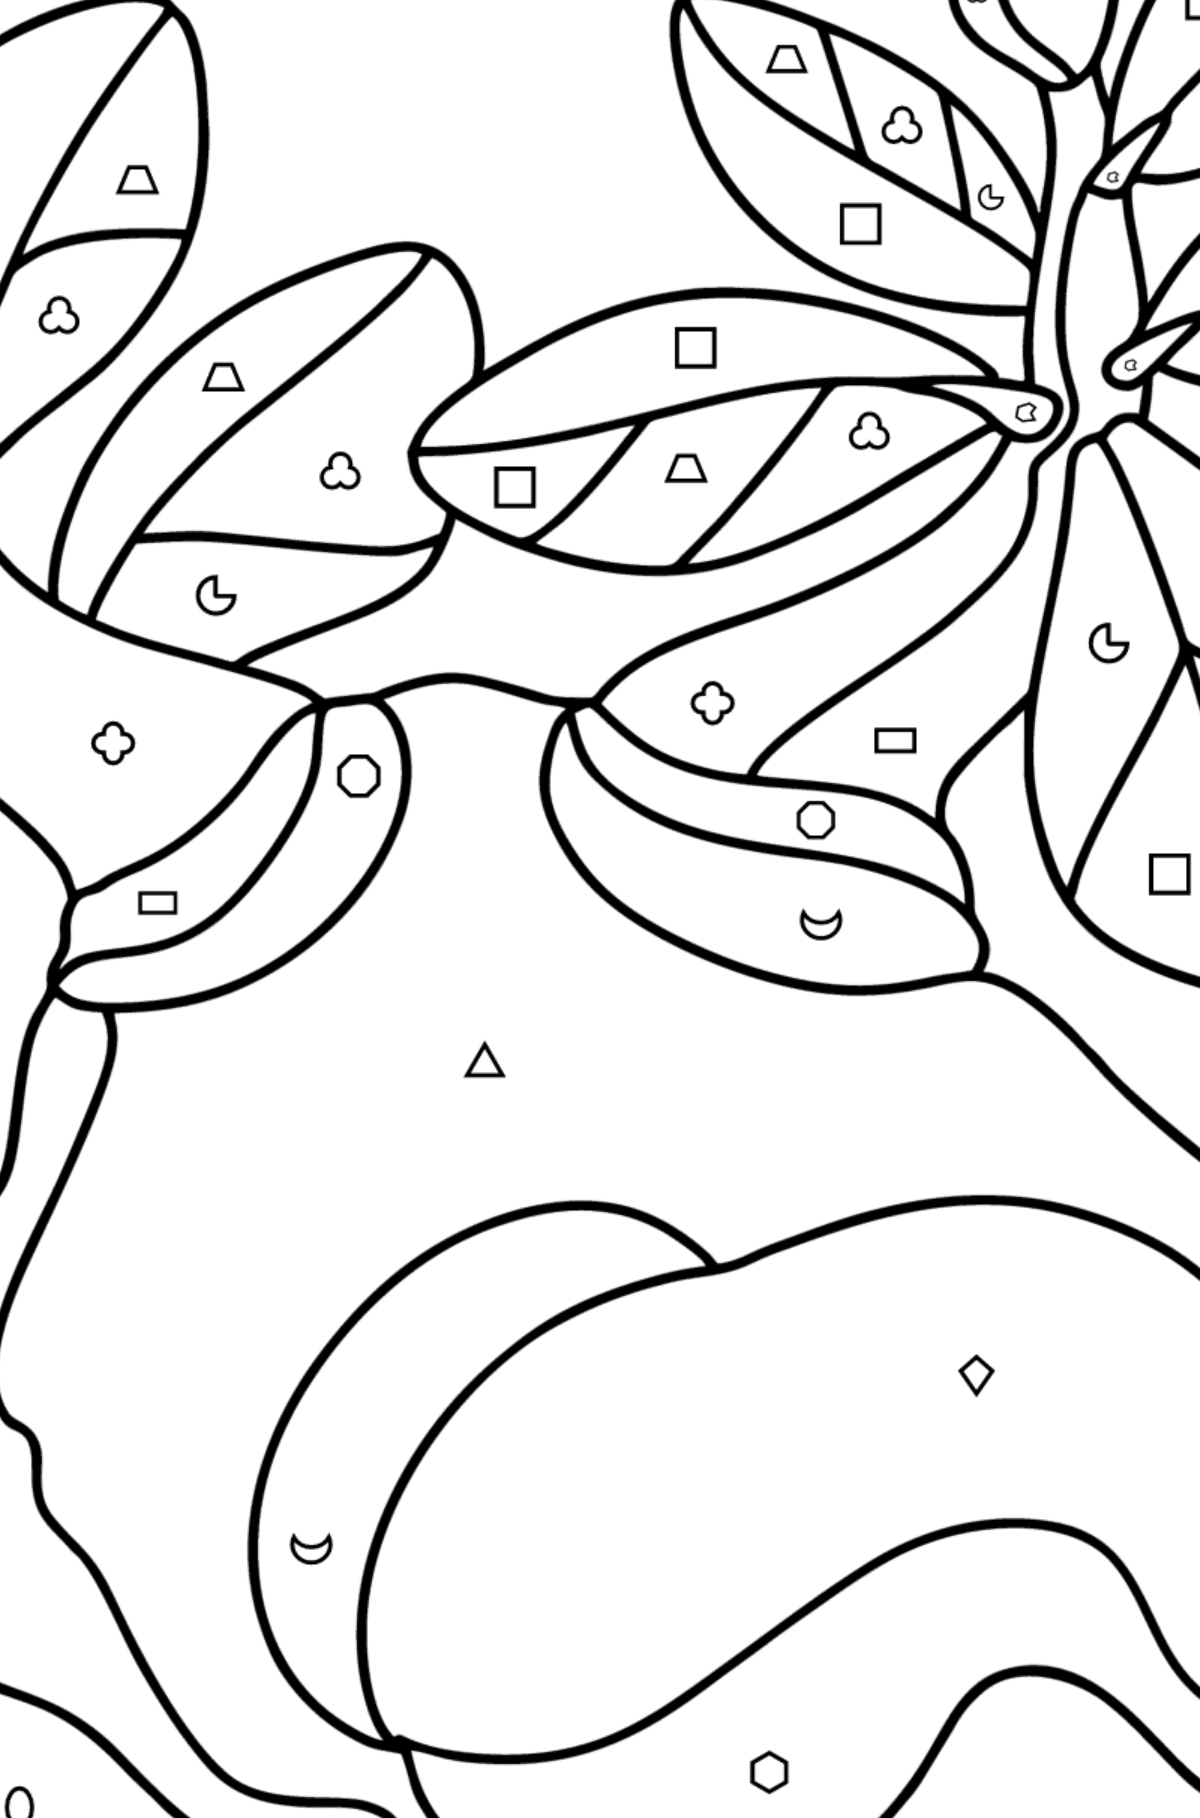 Adenium coloring page - Coloring by Geometric Shapes for Kids